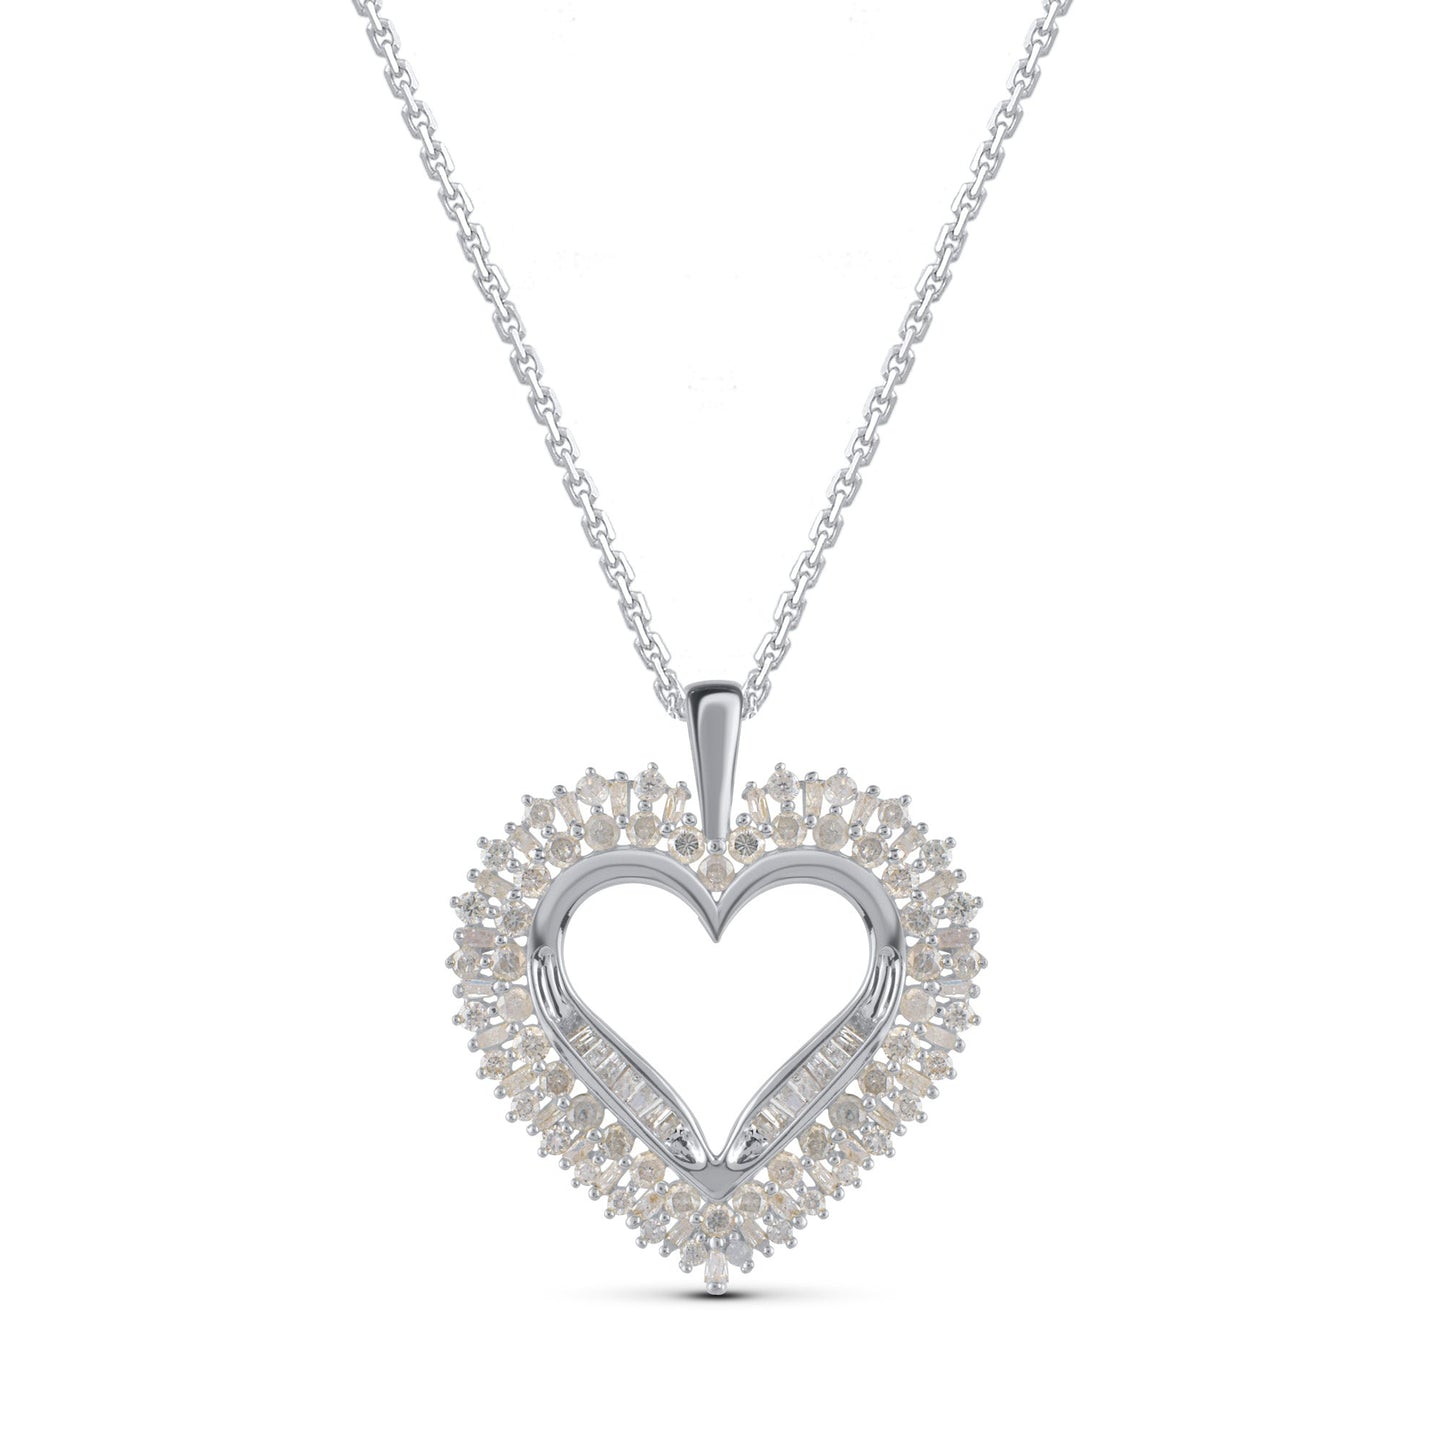 Baguette Heart Pendant Necklace in 925 Sterling Silver